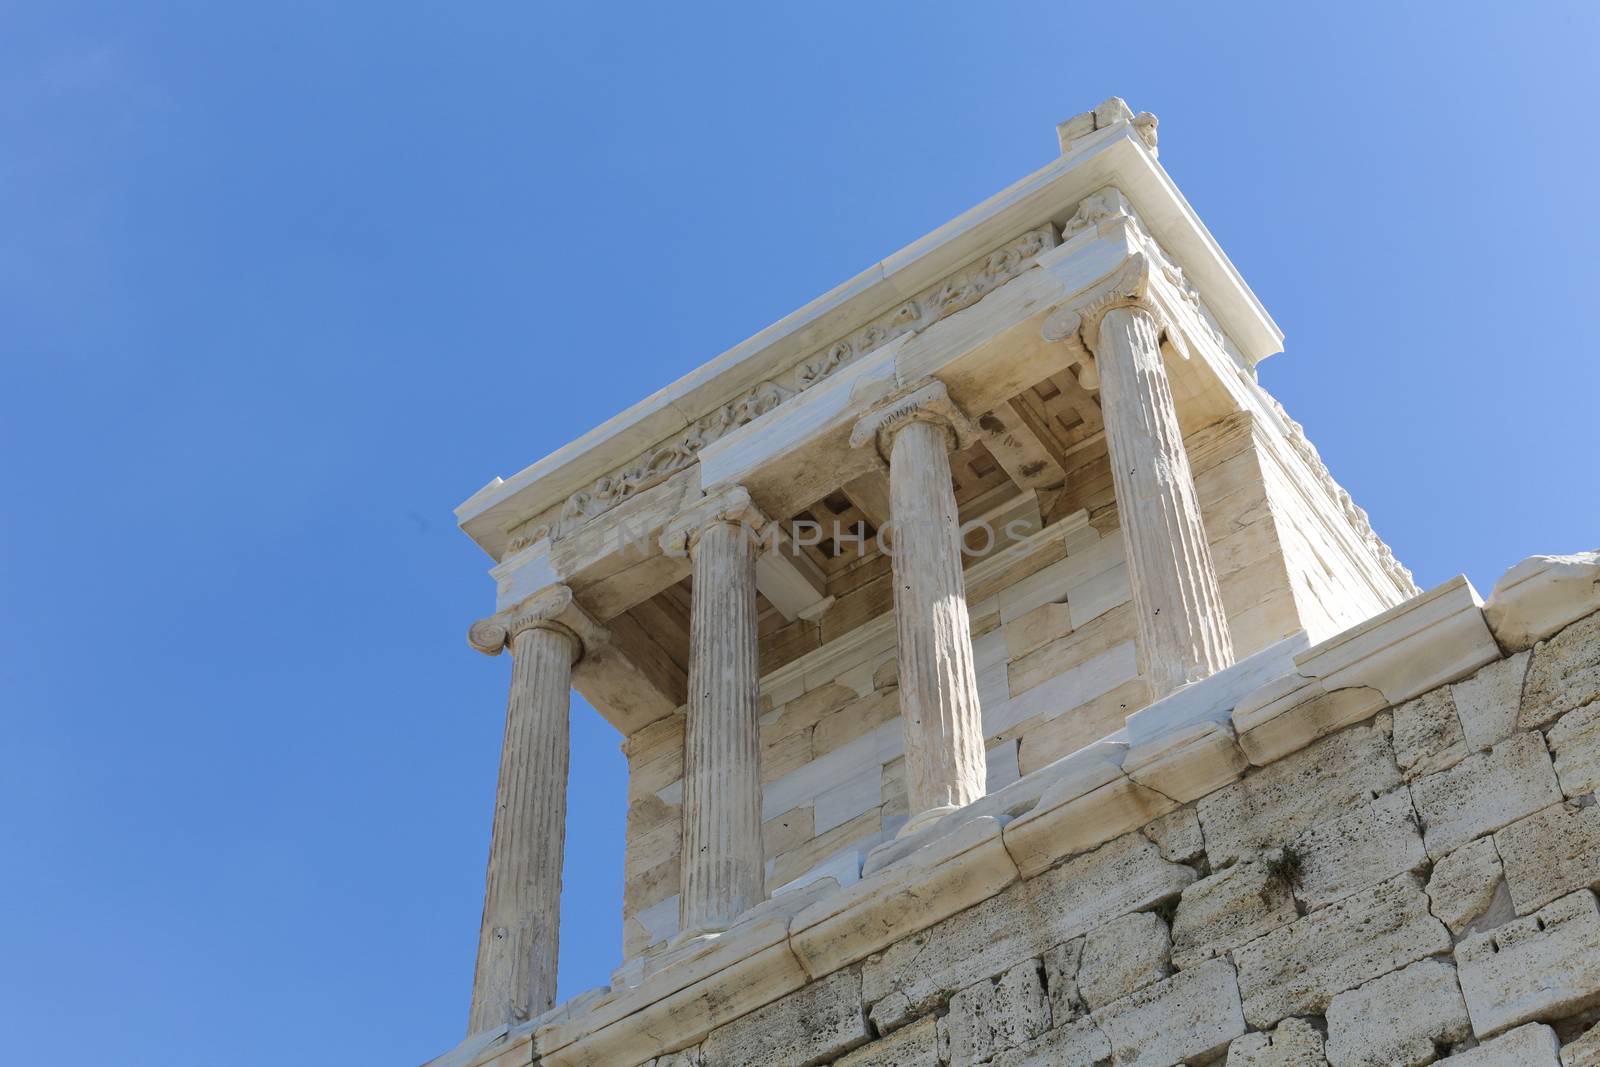 The Temple of Athena Nike at the Acropolis in Athens, Greece